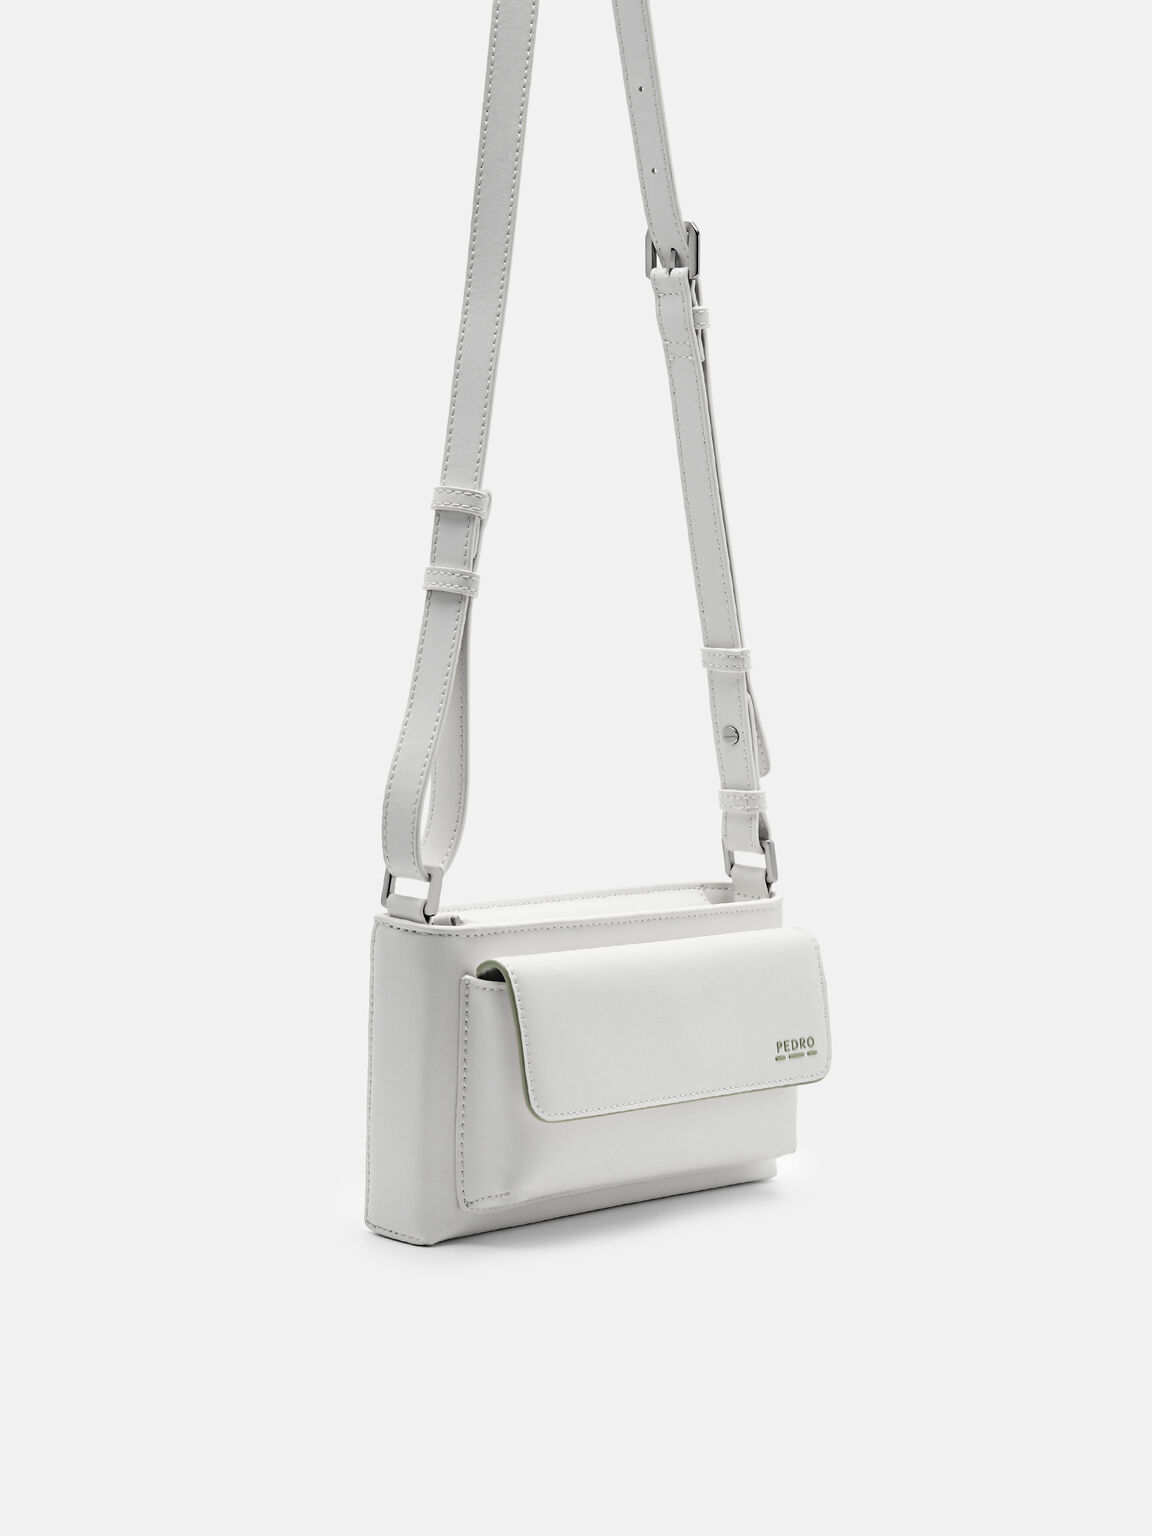 rePEDRO Recycled Leather Mini Sling Bag, White, hi-res